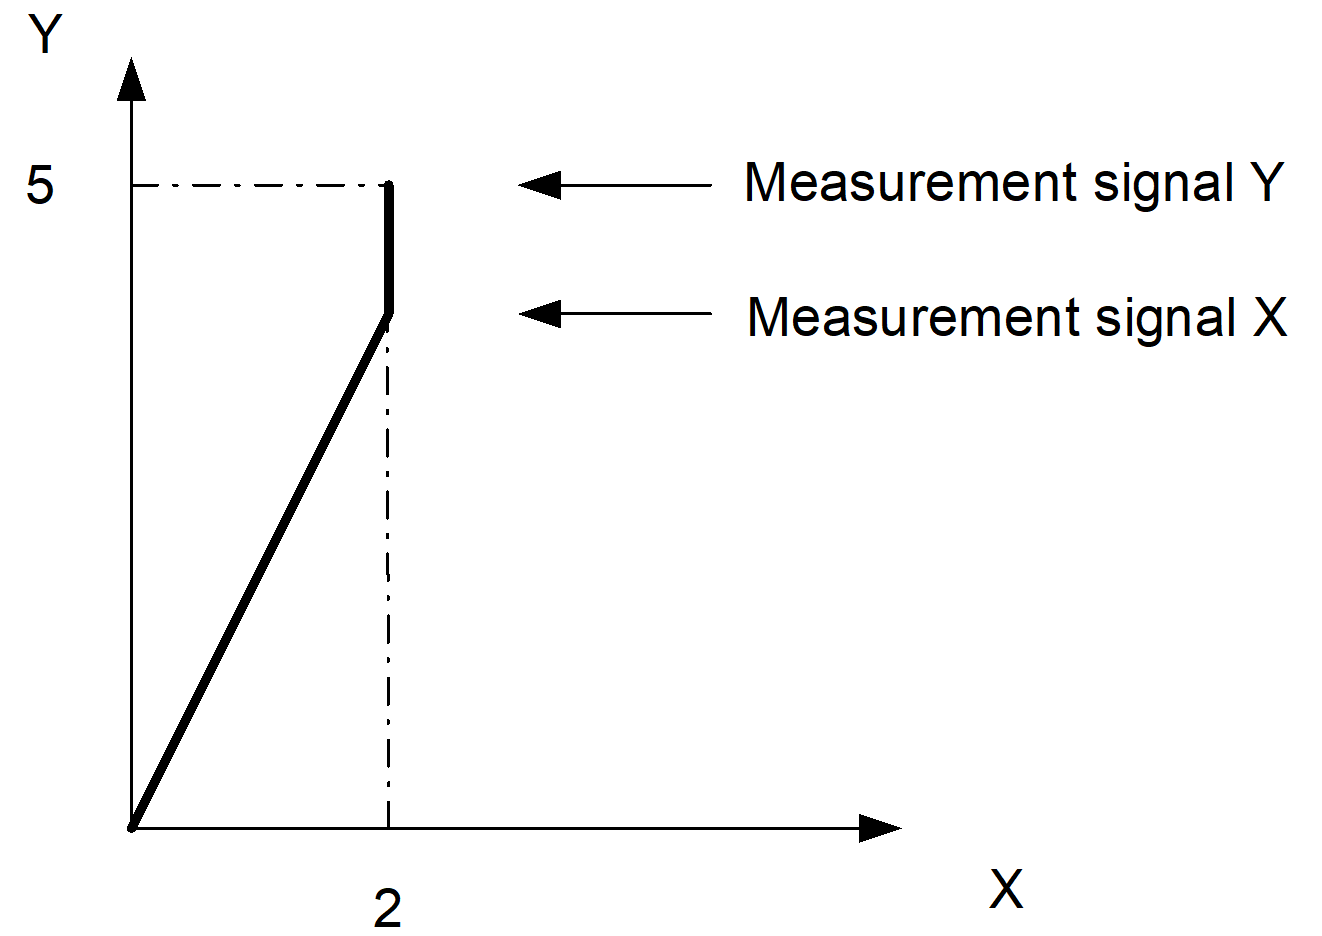 Resulting axis movements of the independent measurement run